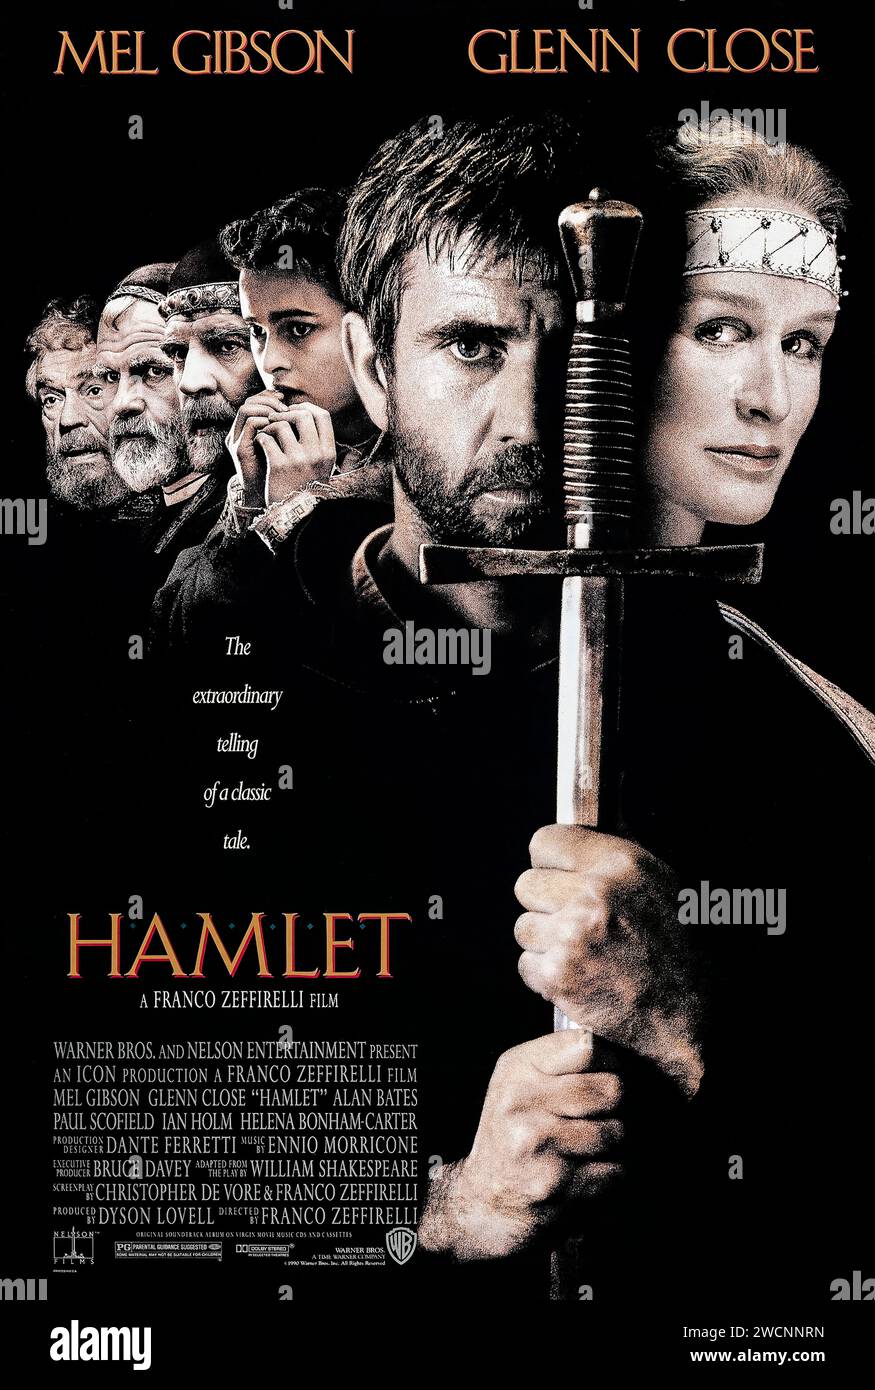 Hamlet (1990) directed by Franco Zeffirelli and starring Mel Gibson, Glenn Close and Alan Bates. Hamlet, Prince of Denmark, finds out that his uncle Claudius killed his father to obtain the throne, and plans revenge. US one sheet poster ***EDITORIAL USE ONLY***. Credit: BFA / Warner Bros Stock Photo